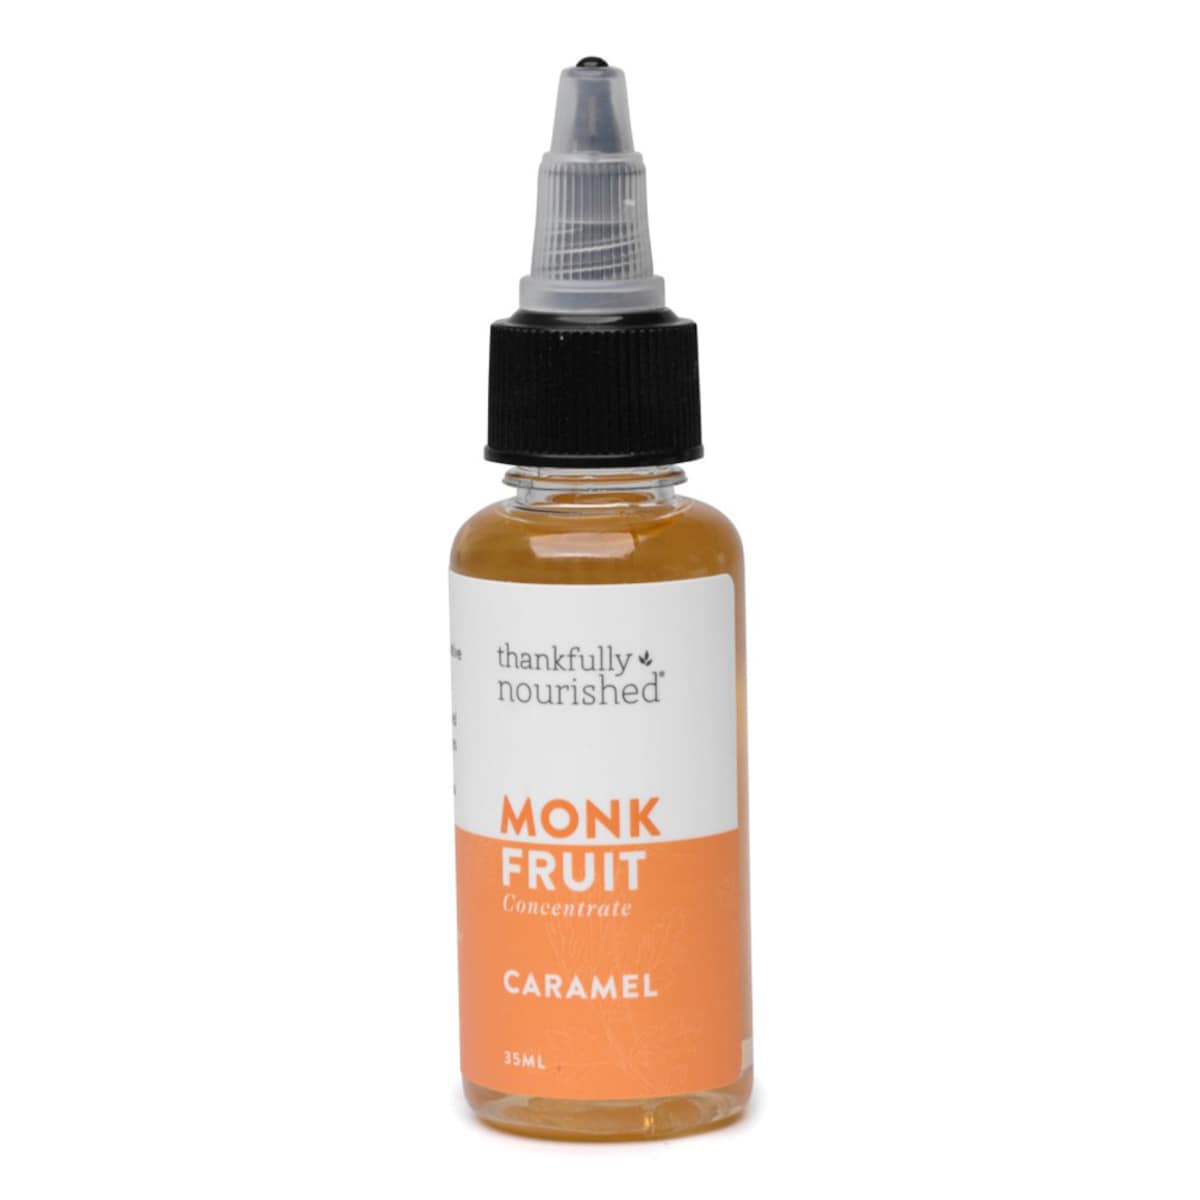 Thankfully Nourished Monk Fruit Concentrate Caramel 35ml